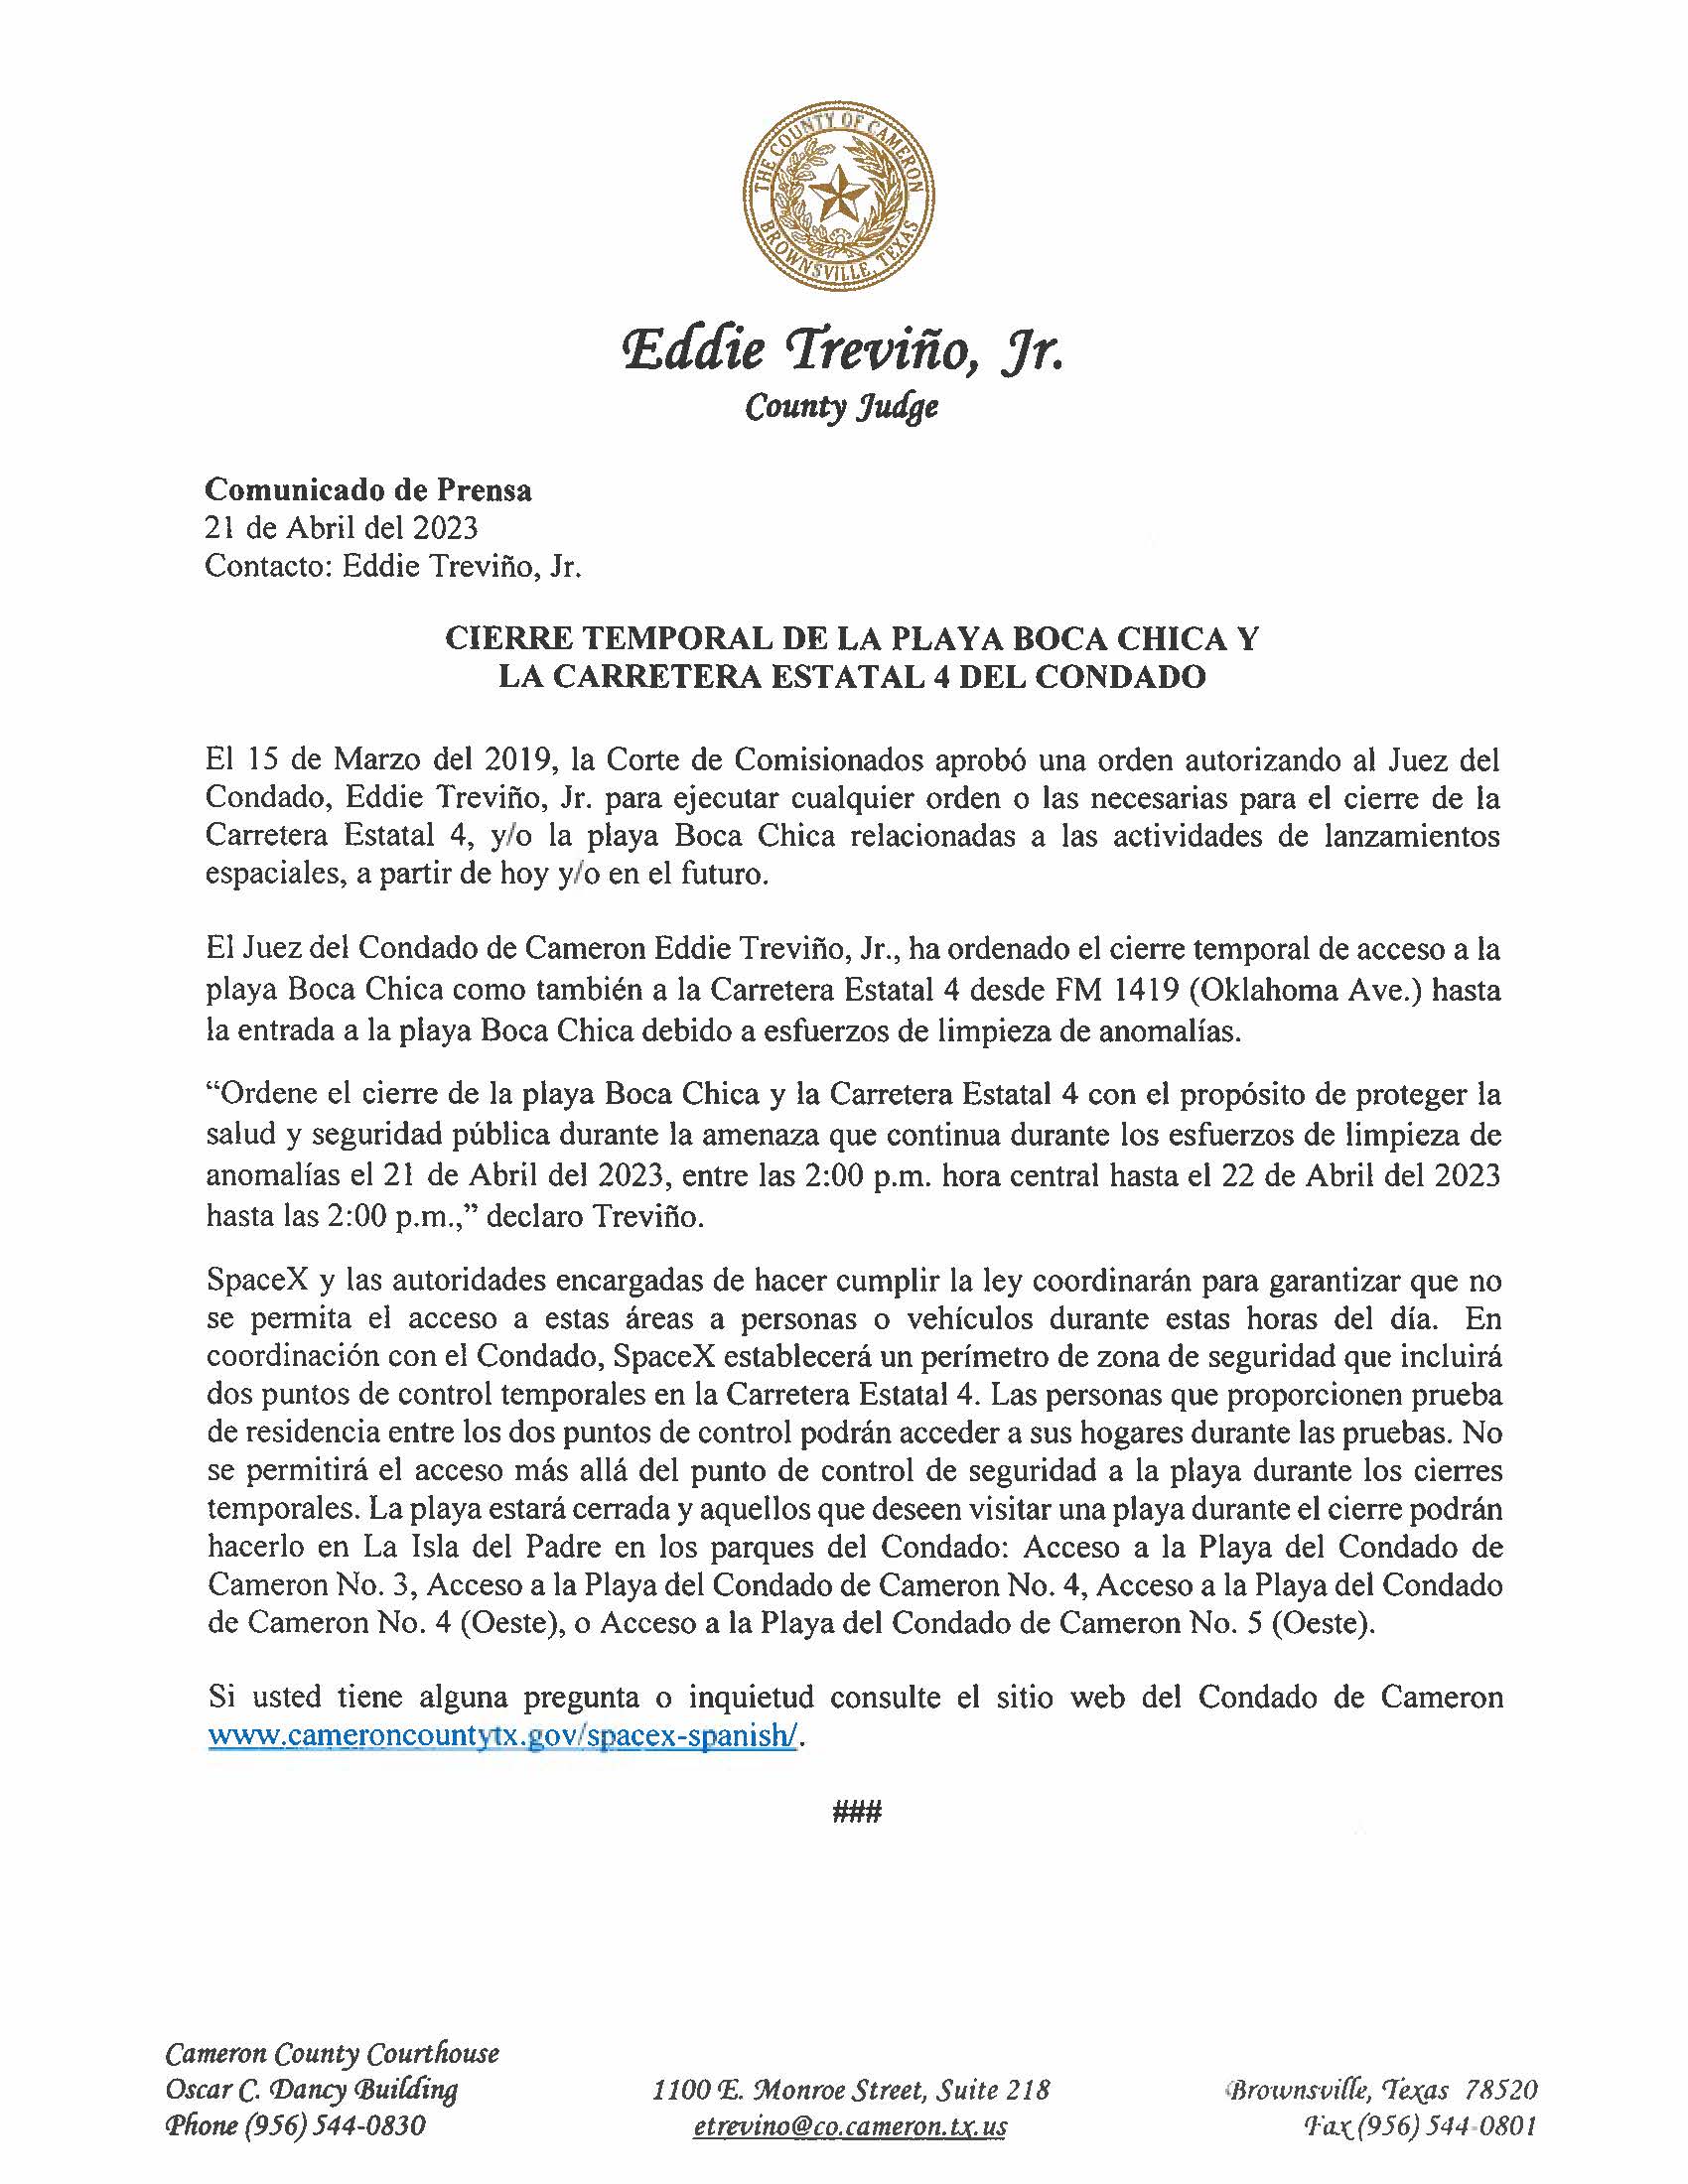 Press Release In English And Spanish.04.21.2023 Page 1